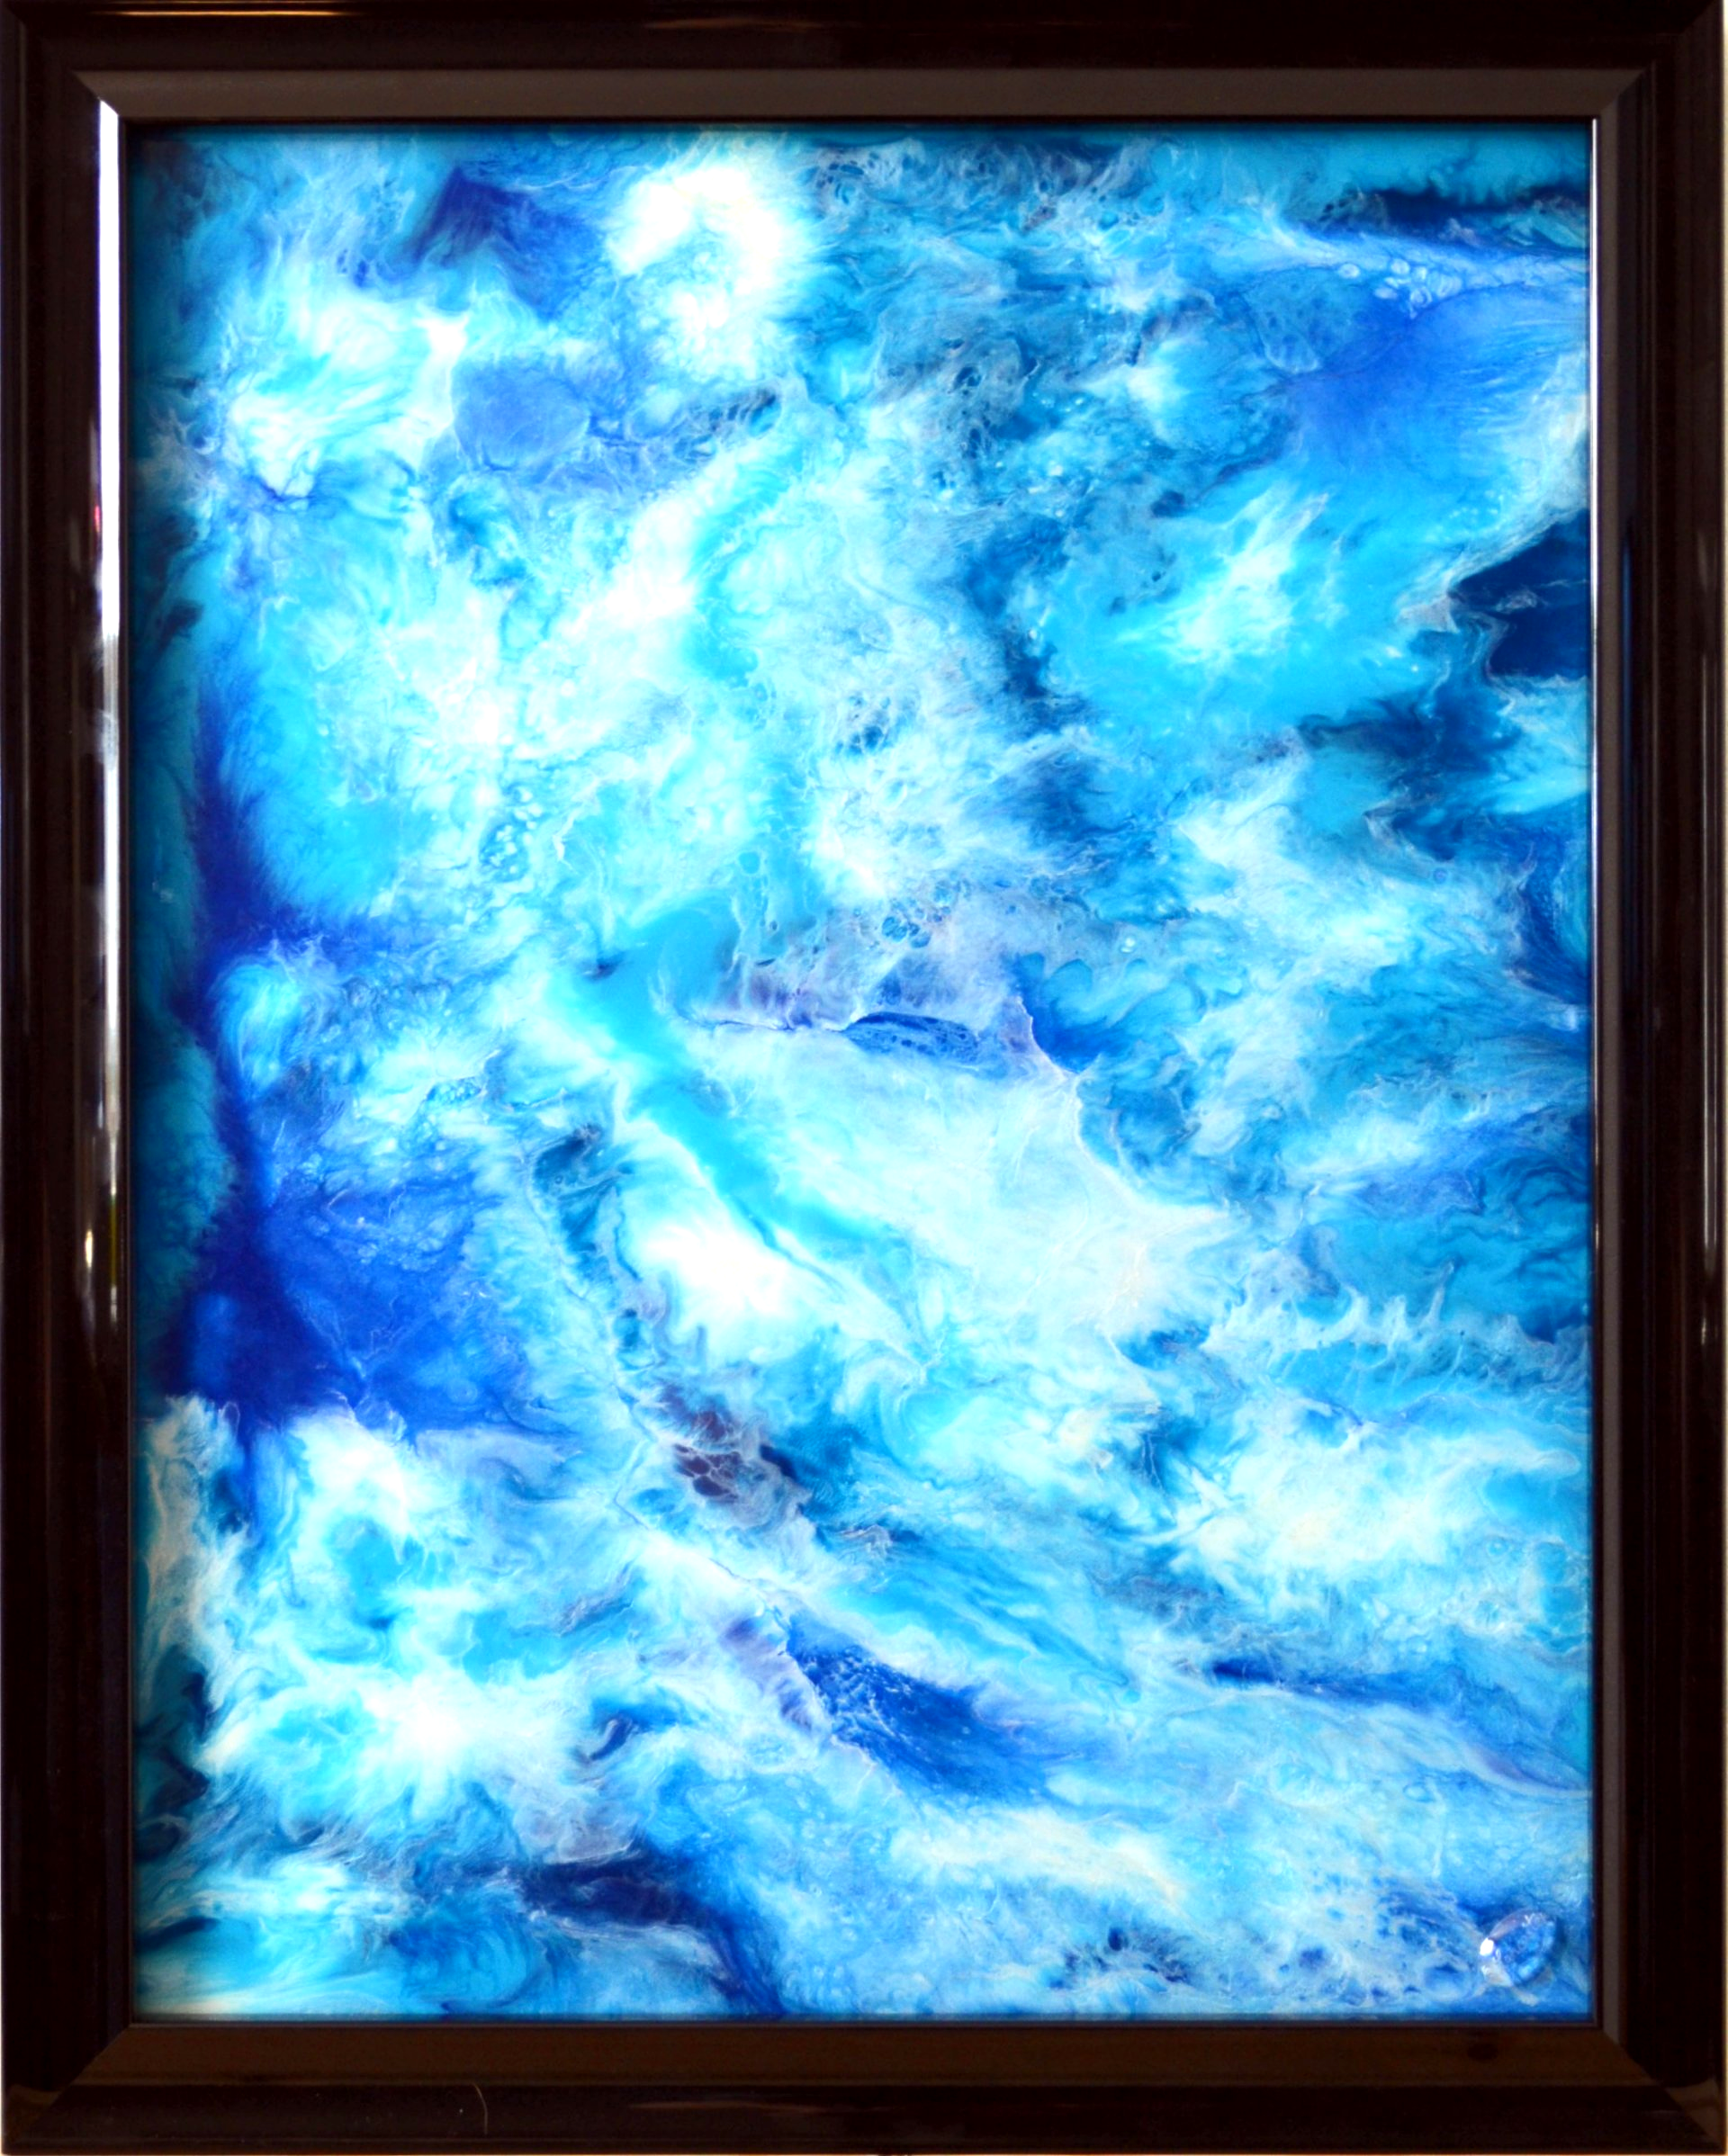 Reflections in Blue, original resin painting representing the ocean from space, meditative painting, framed and ready to hang